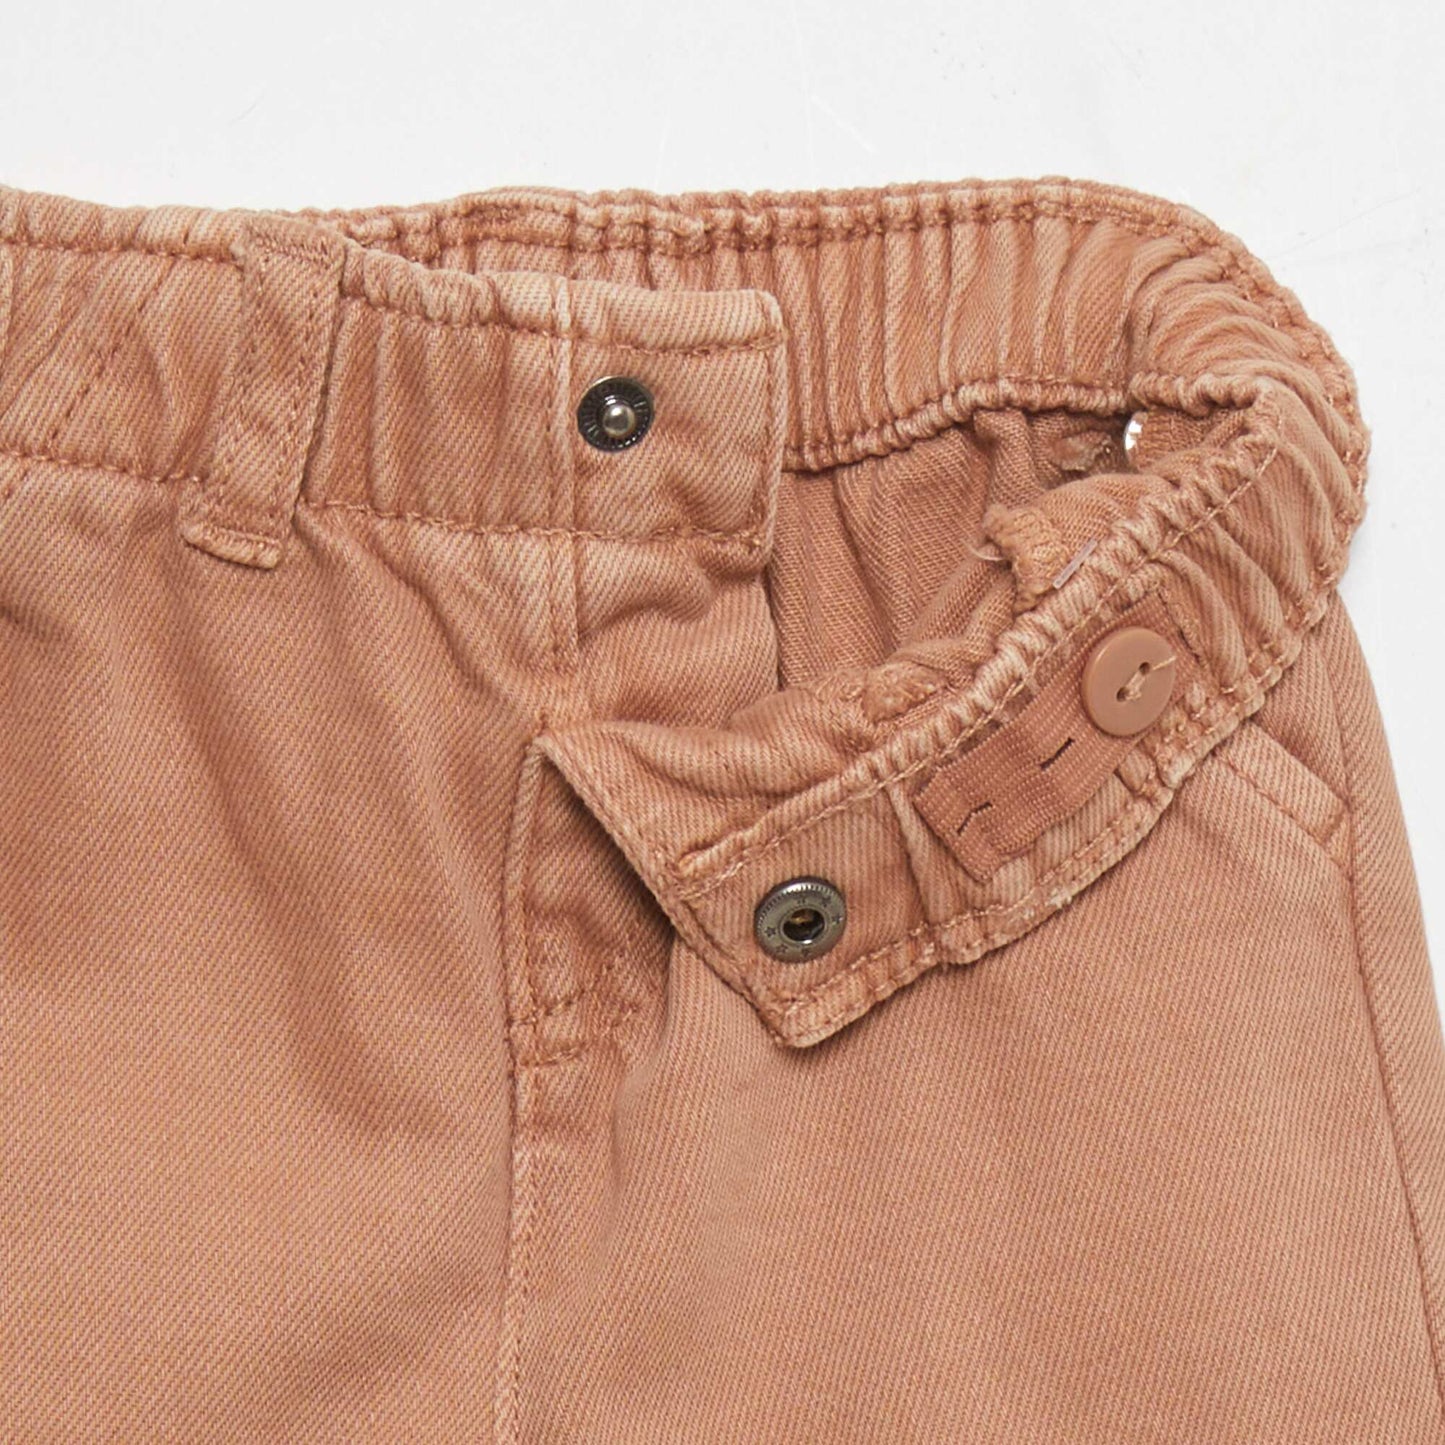 Paper bag style trousers BROWN